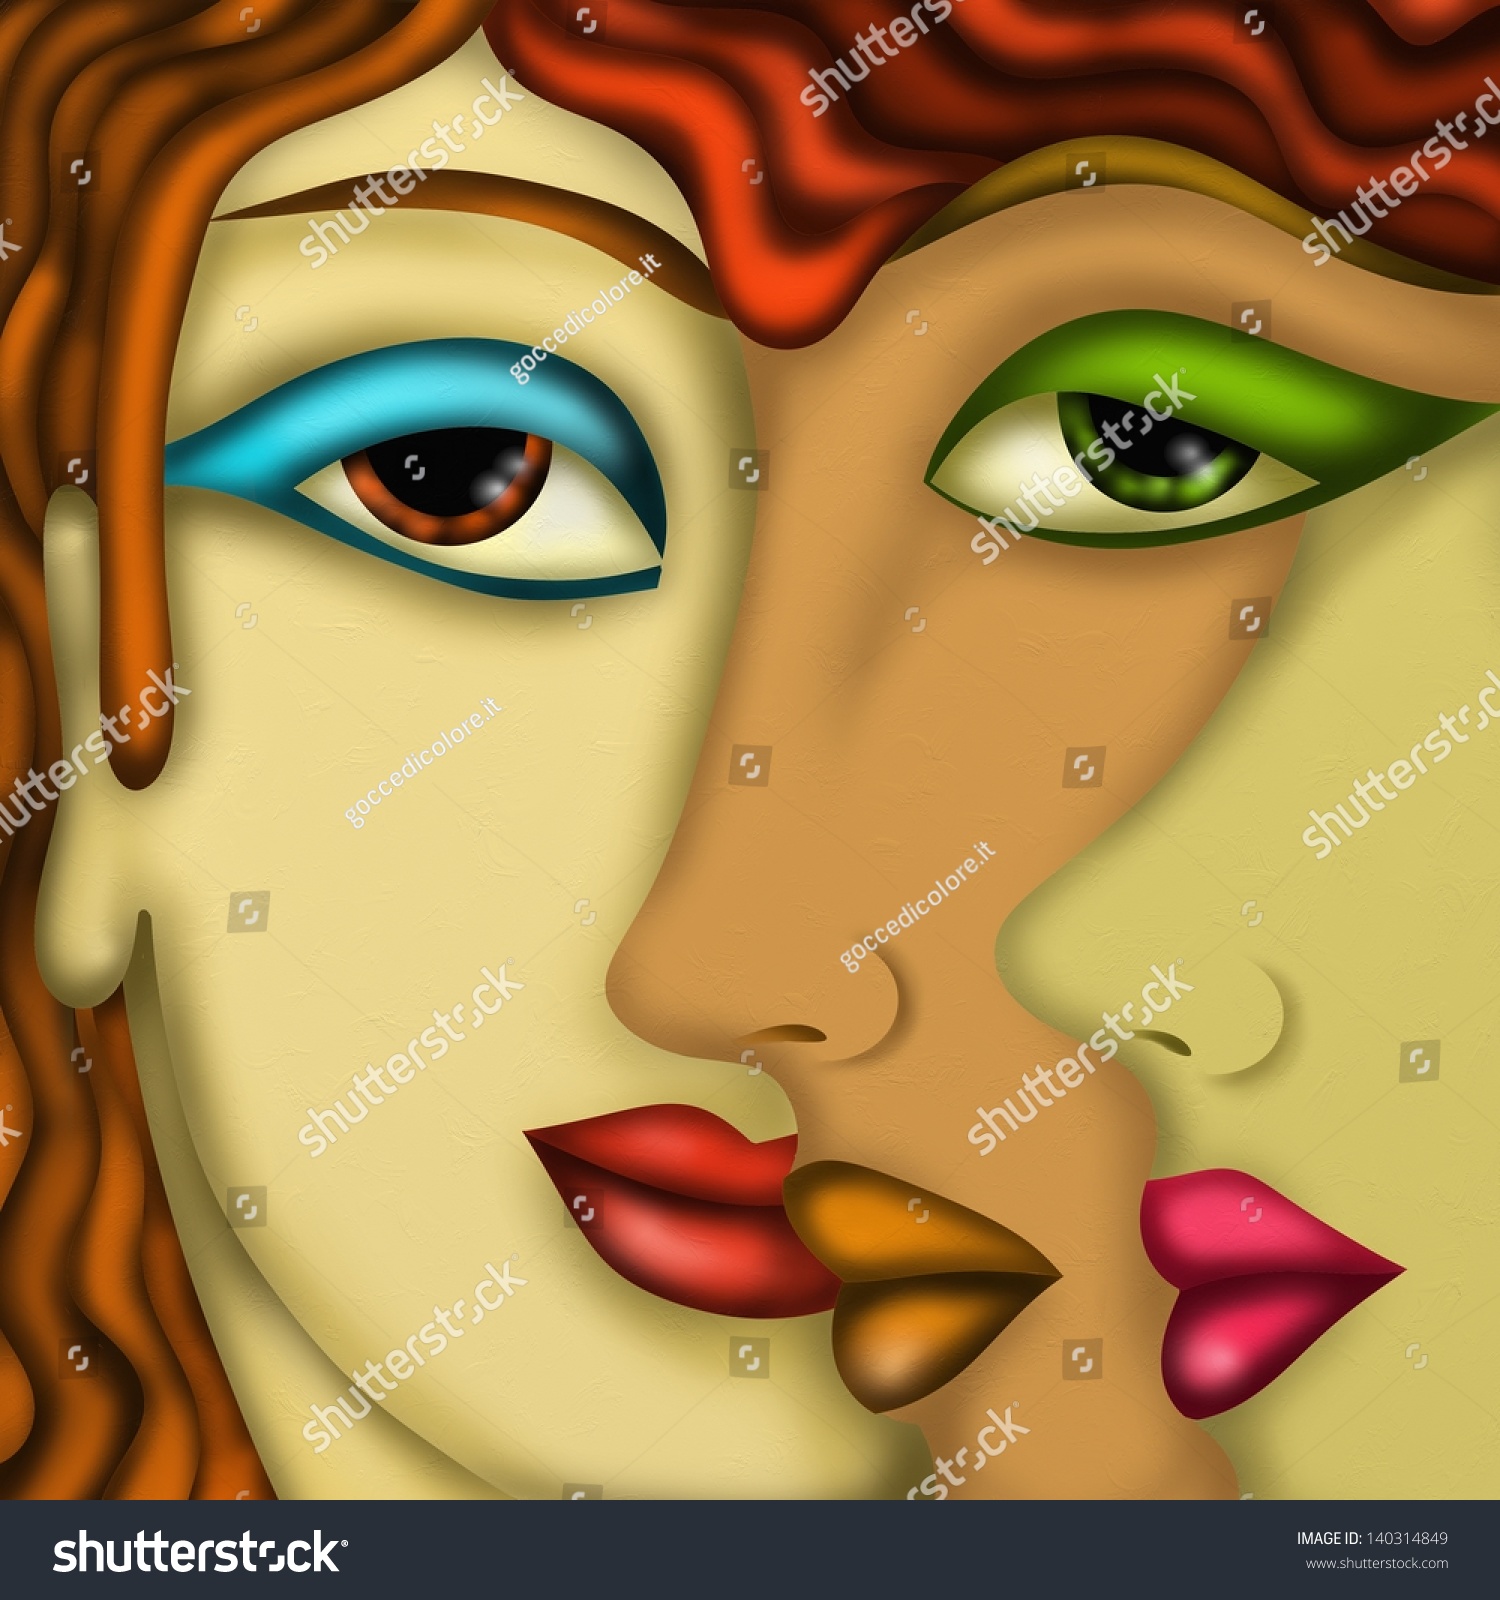 Abstract Design Womens Faces Stock Illustration 140314849 